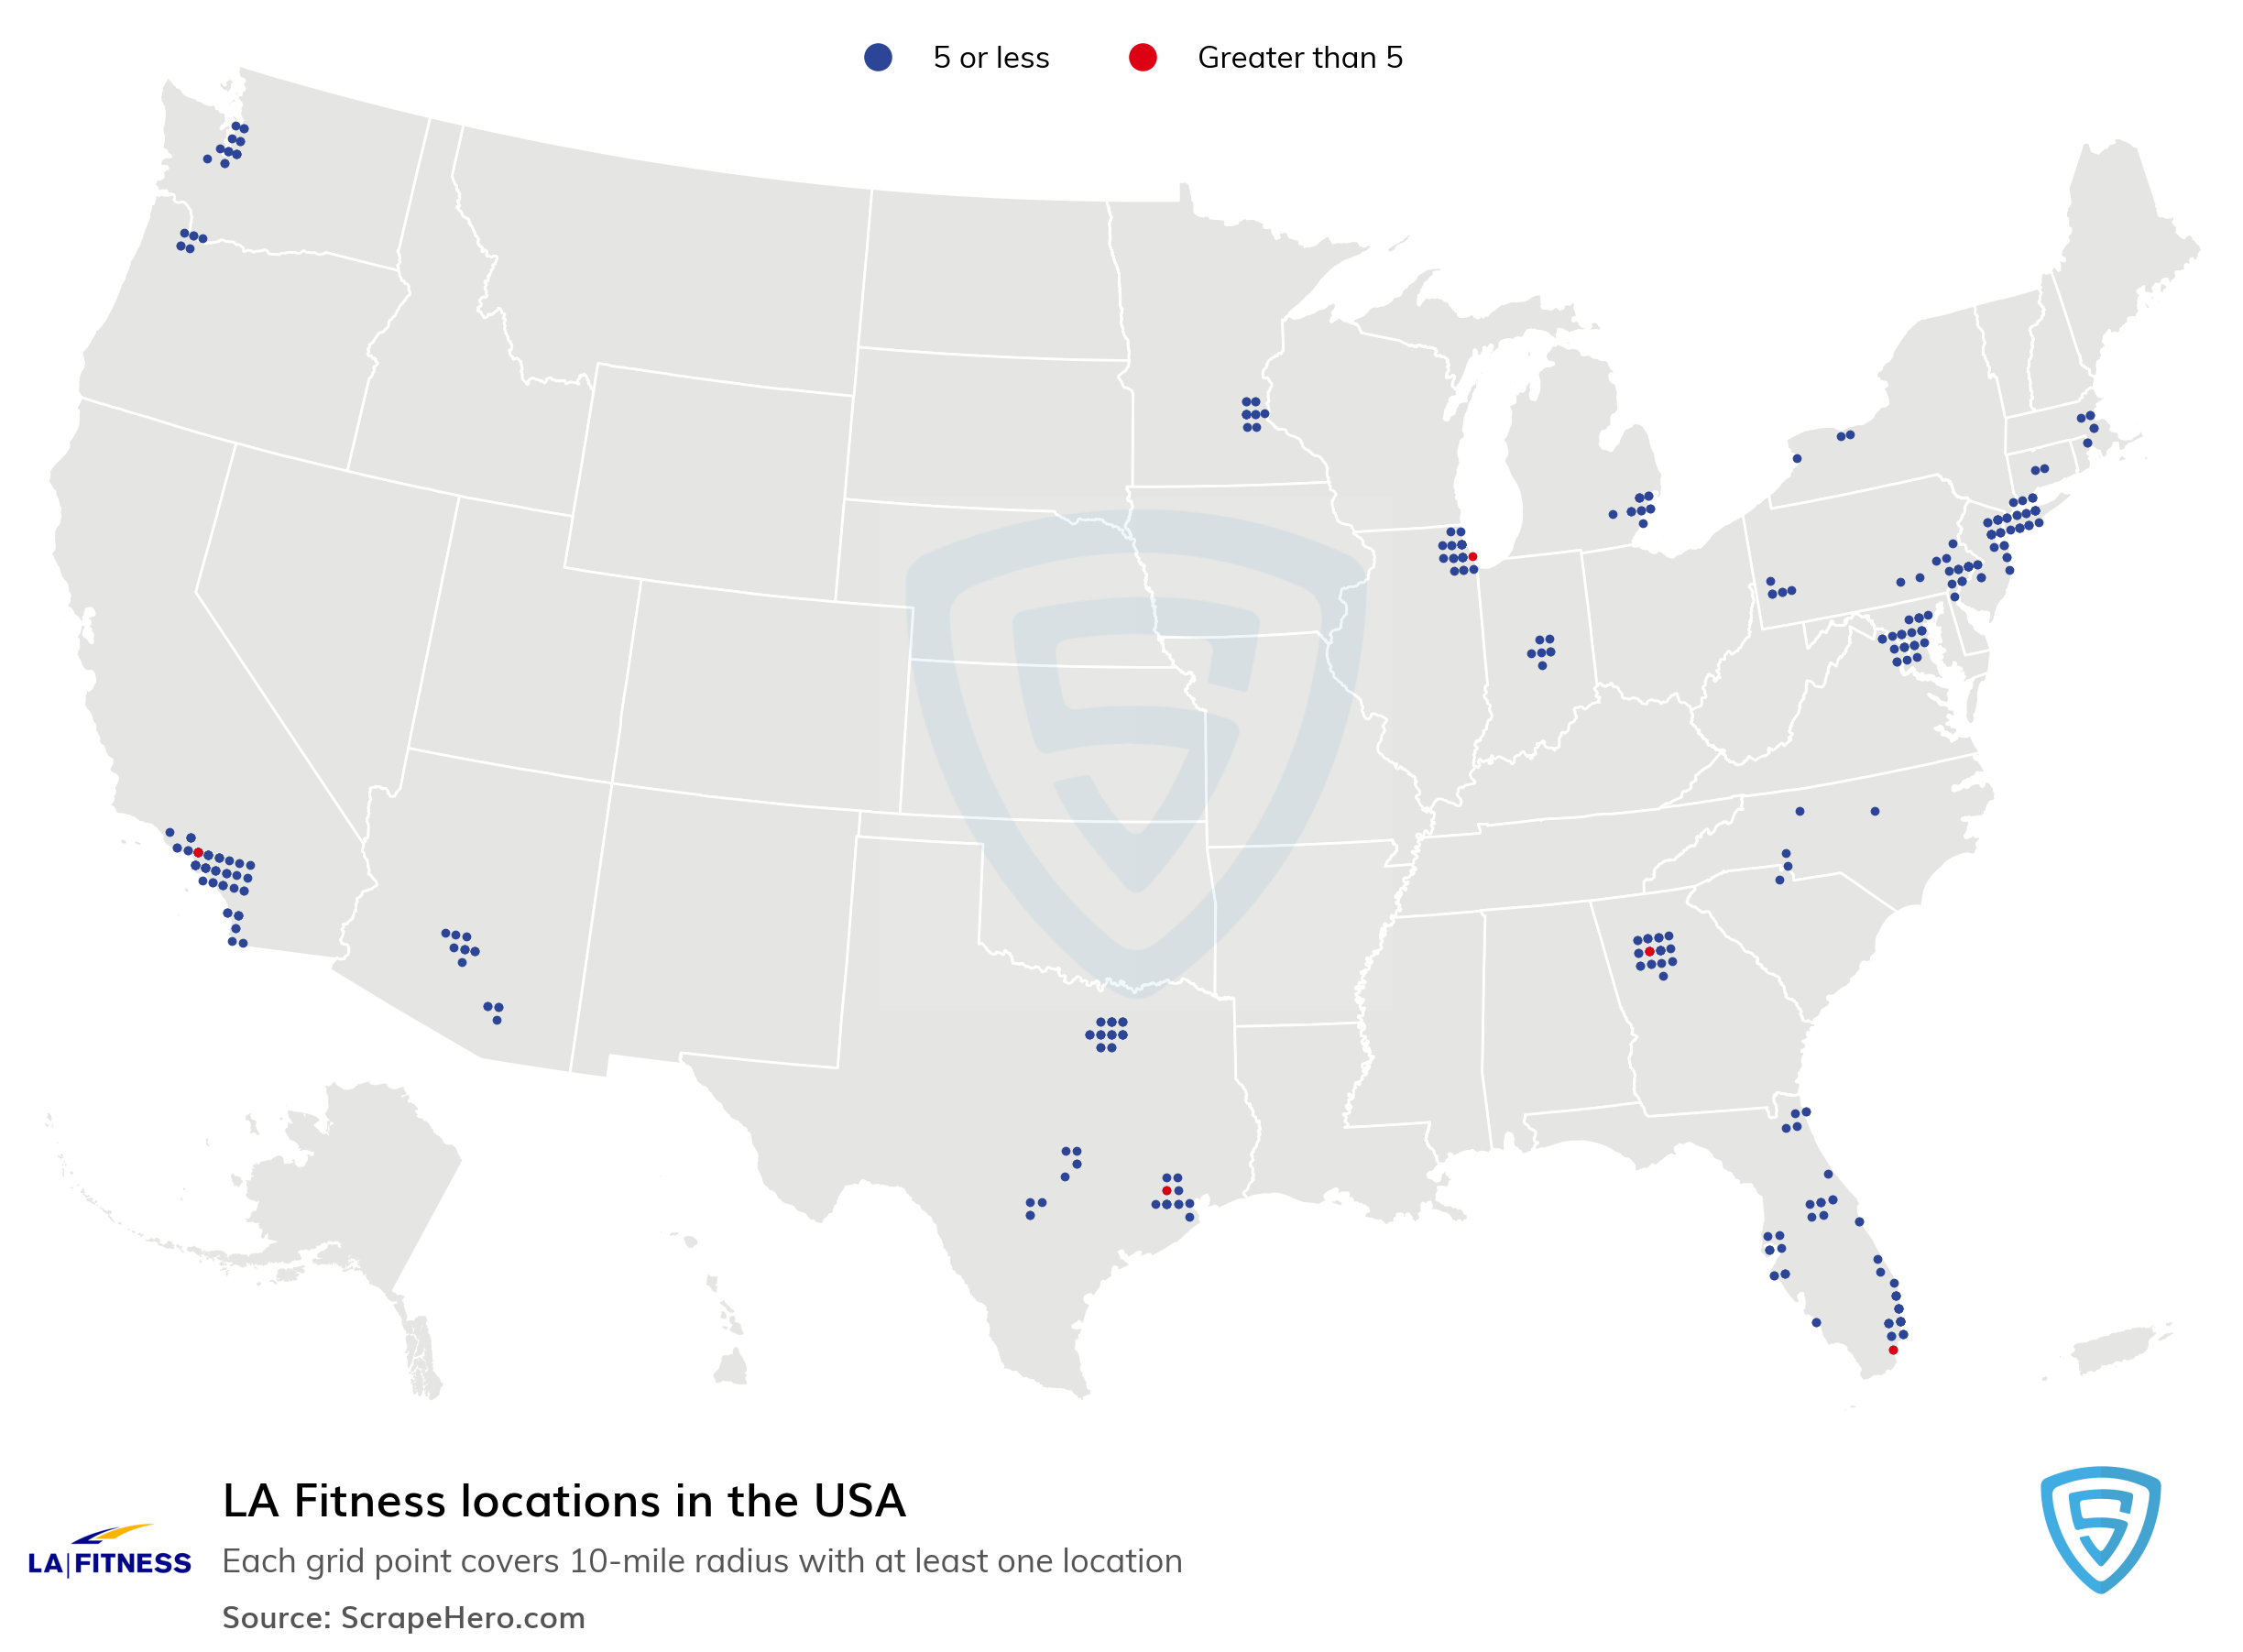 la fitness locations map Number Of La Fitness Locations In The United States Scrapehero la fitness locations map